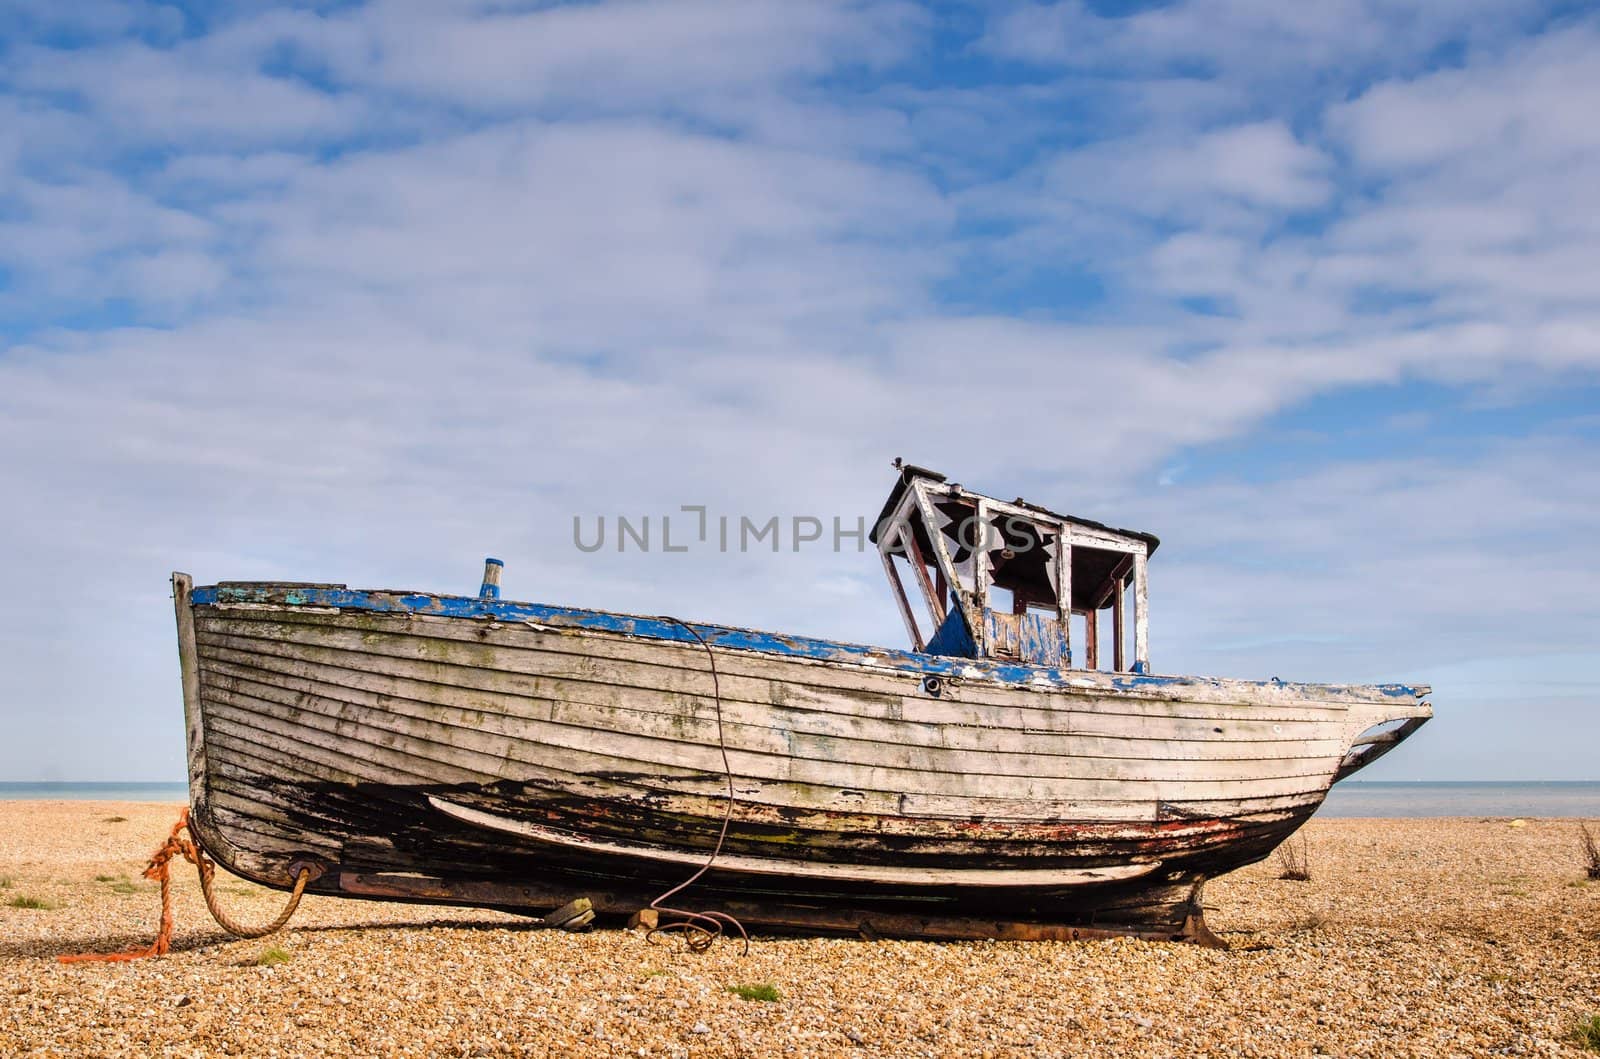 Decaying boat by Jez22